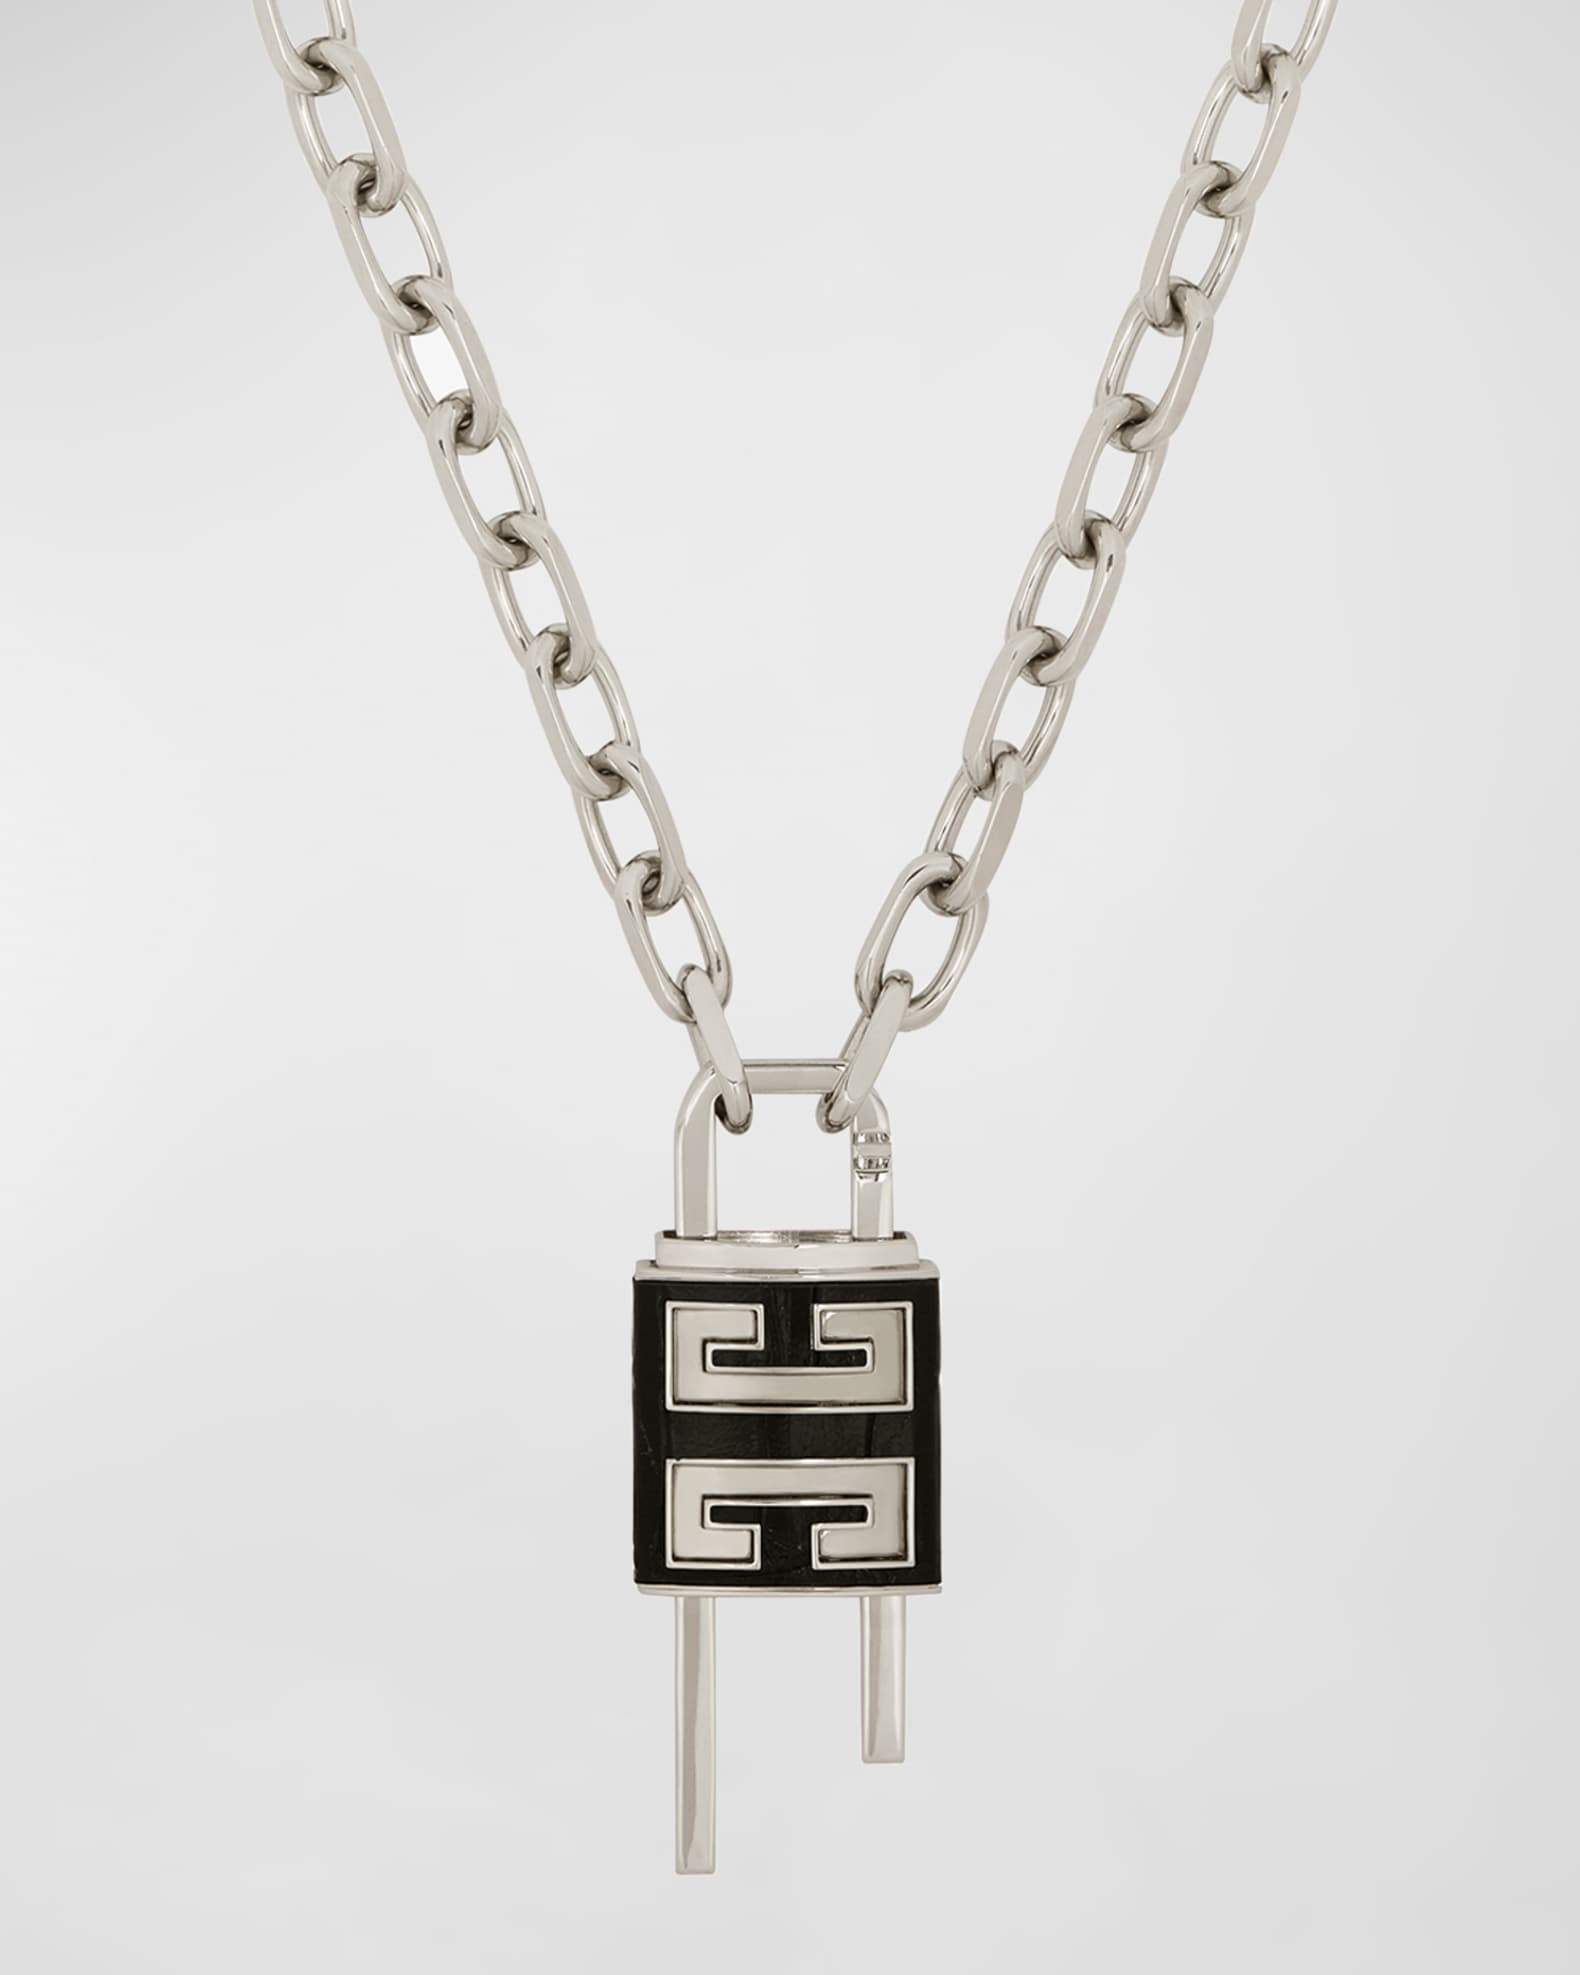 Louis Vuitton Luggage Lock Necklace-Cable Link Chain | Moxie Tales